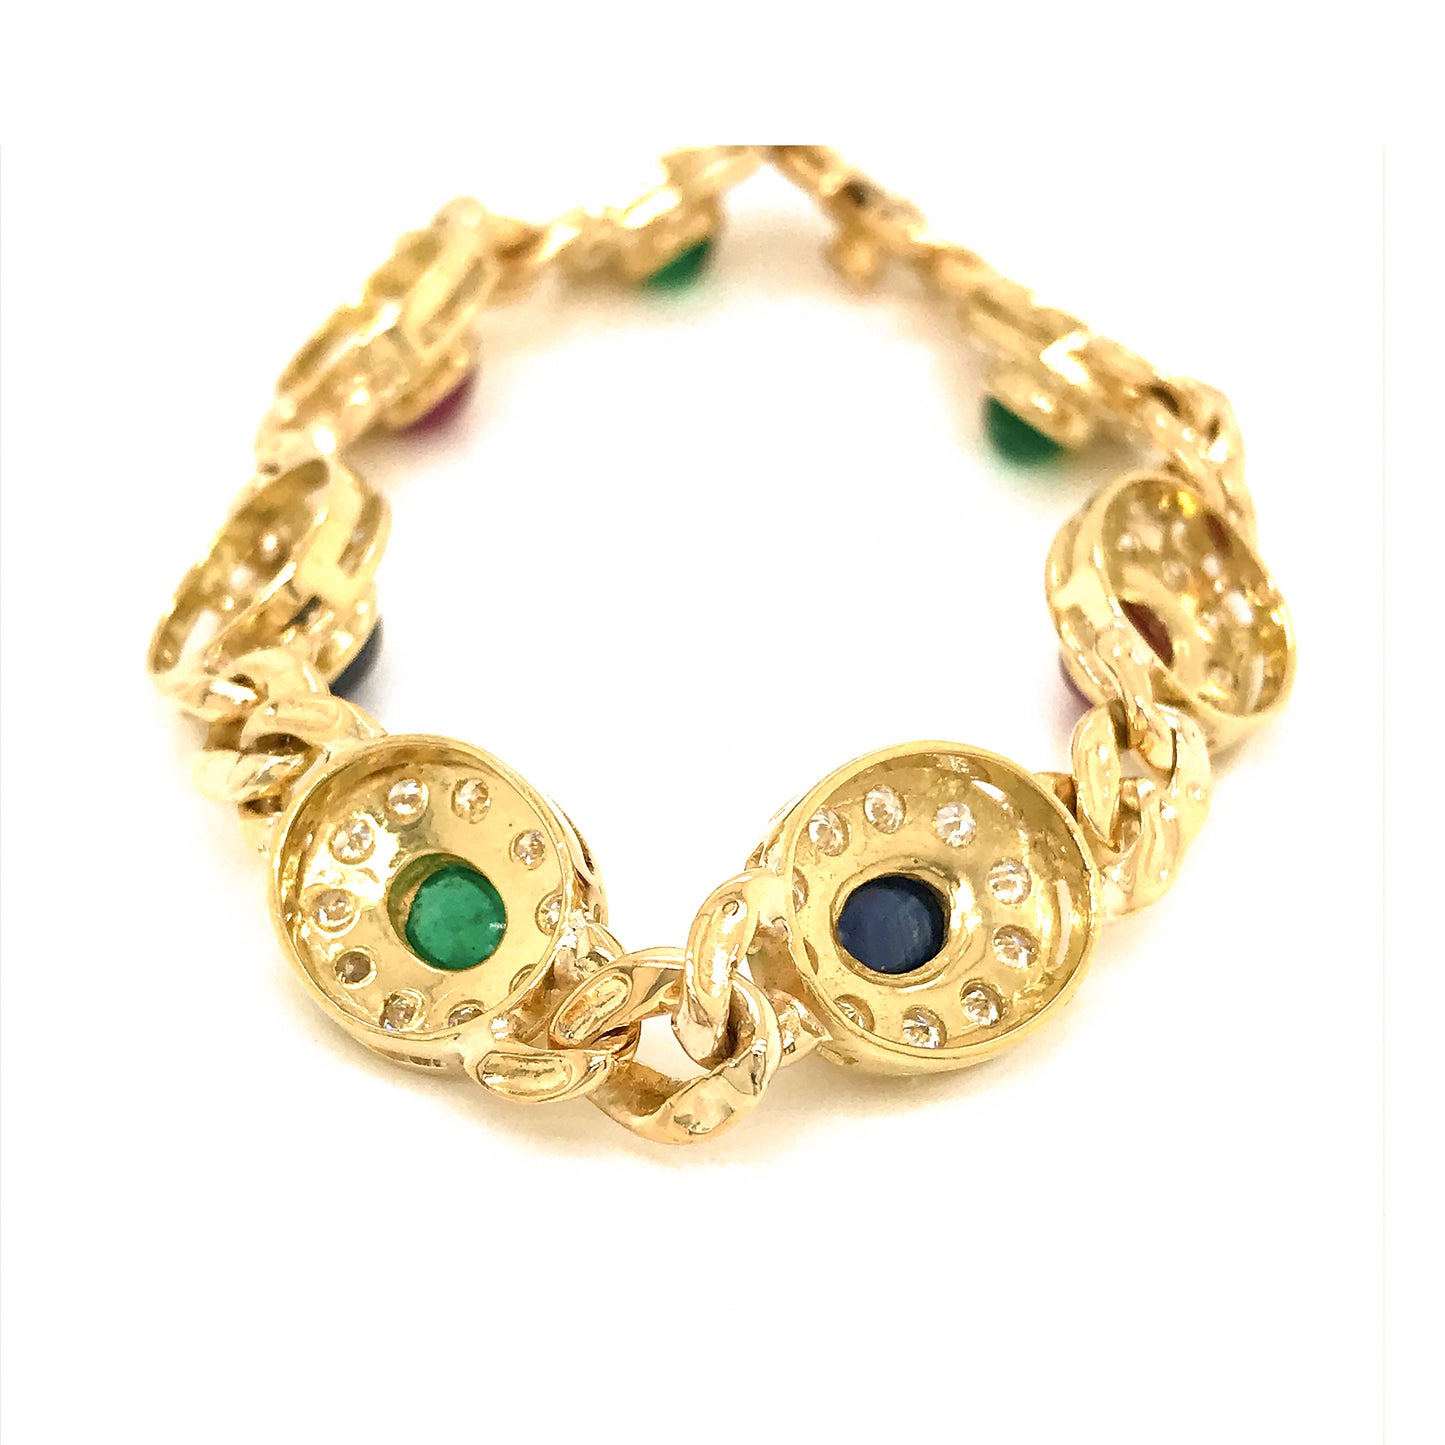 Load image into Gallery viewer, 18k Yellow Gold Precious Gemstones and Diamond Bracelet
